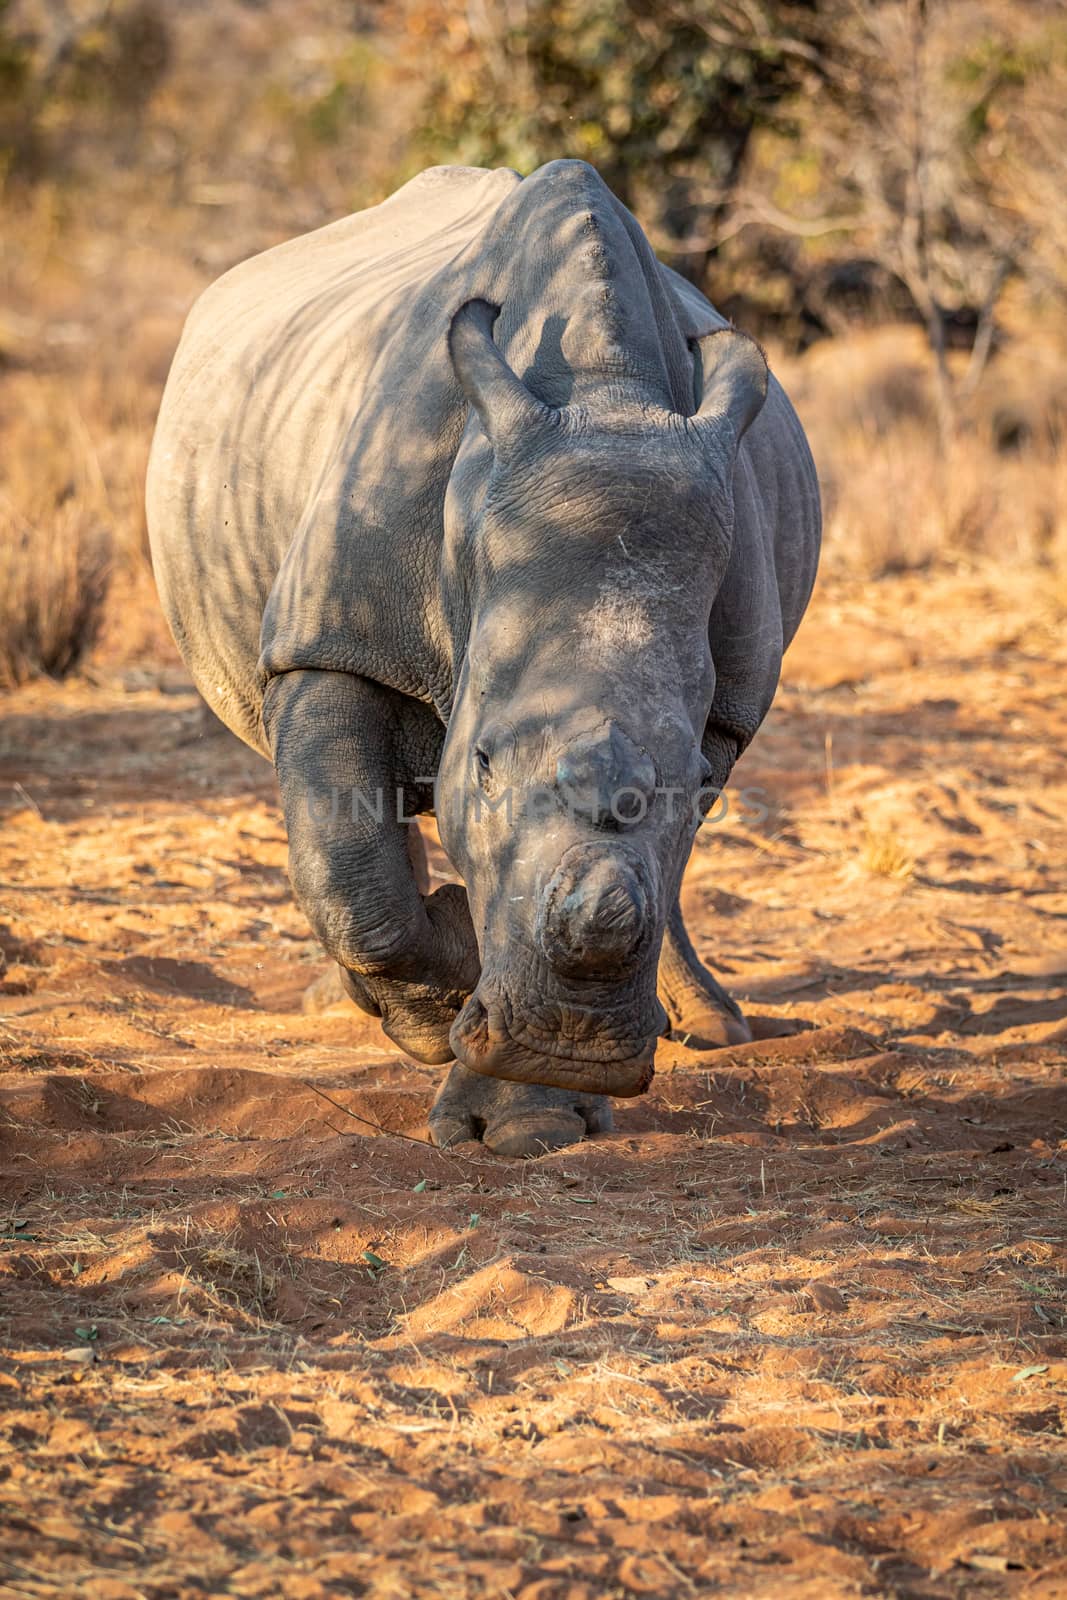 Dehorned White rhino starring at the camera, South Africa.